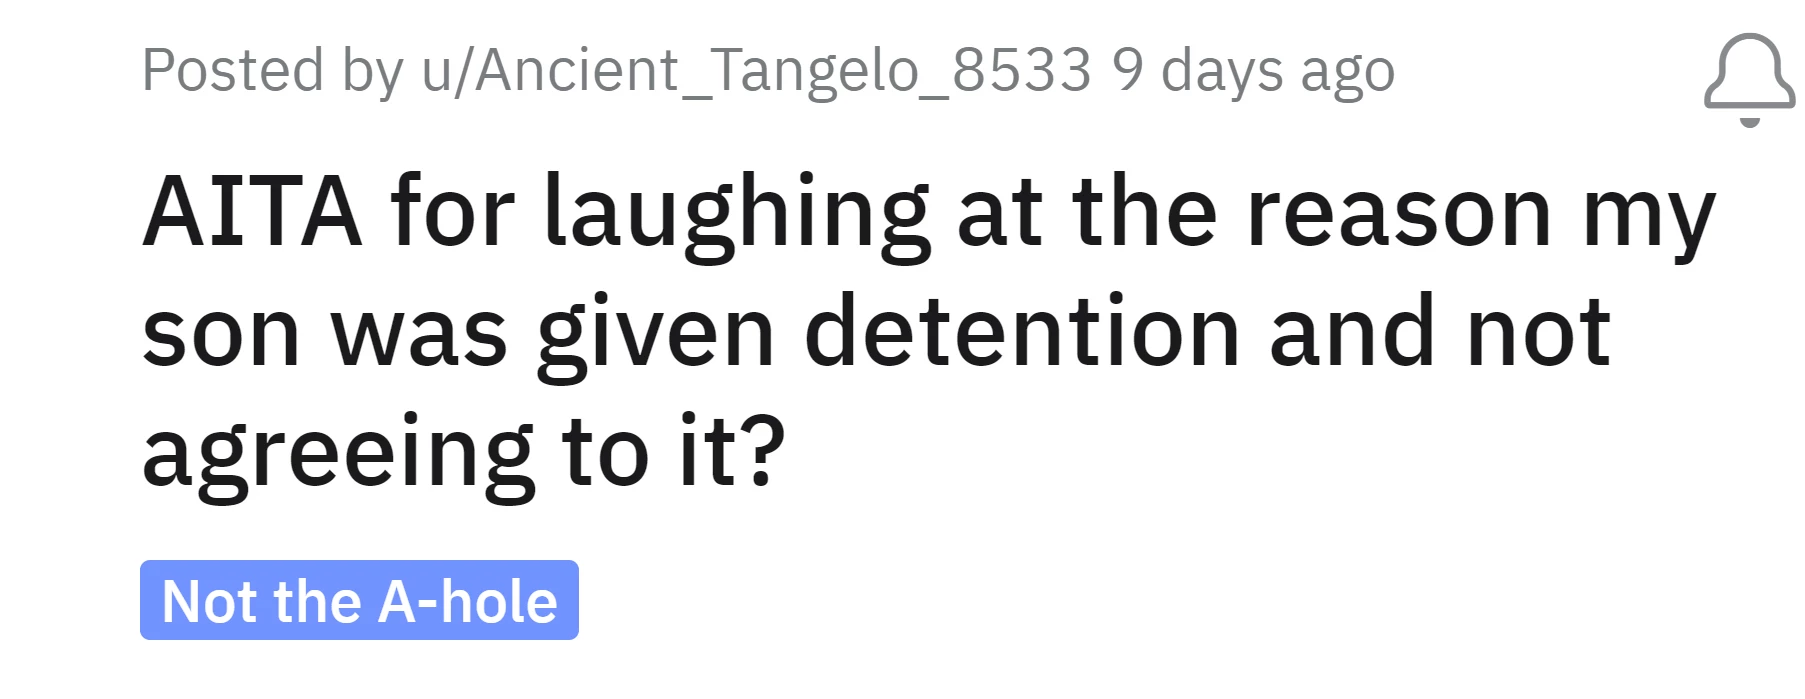 Ancient_Tangelo_8533's question